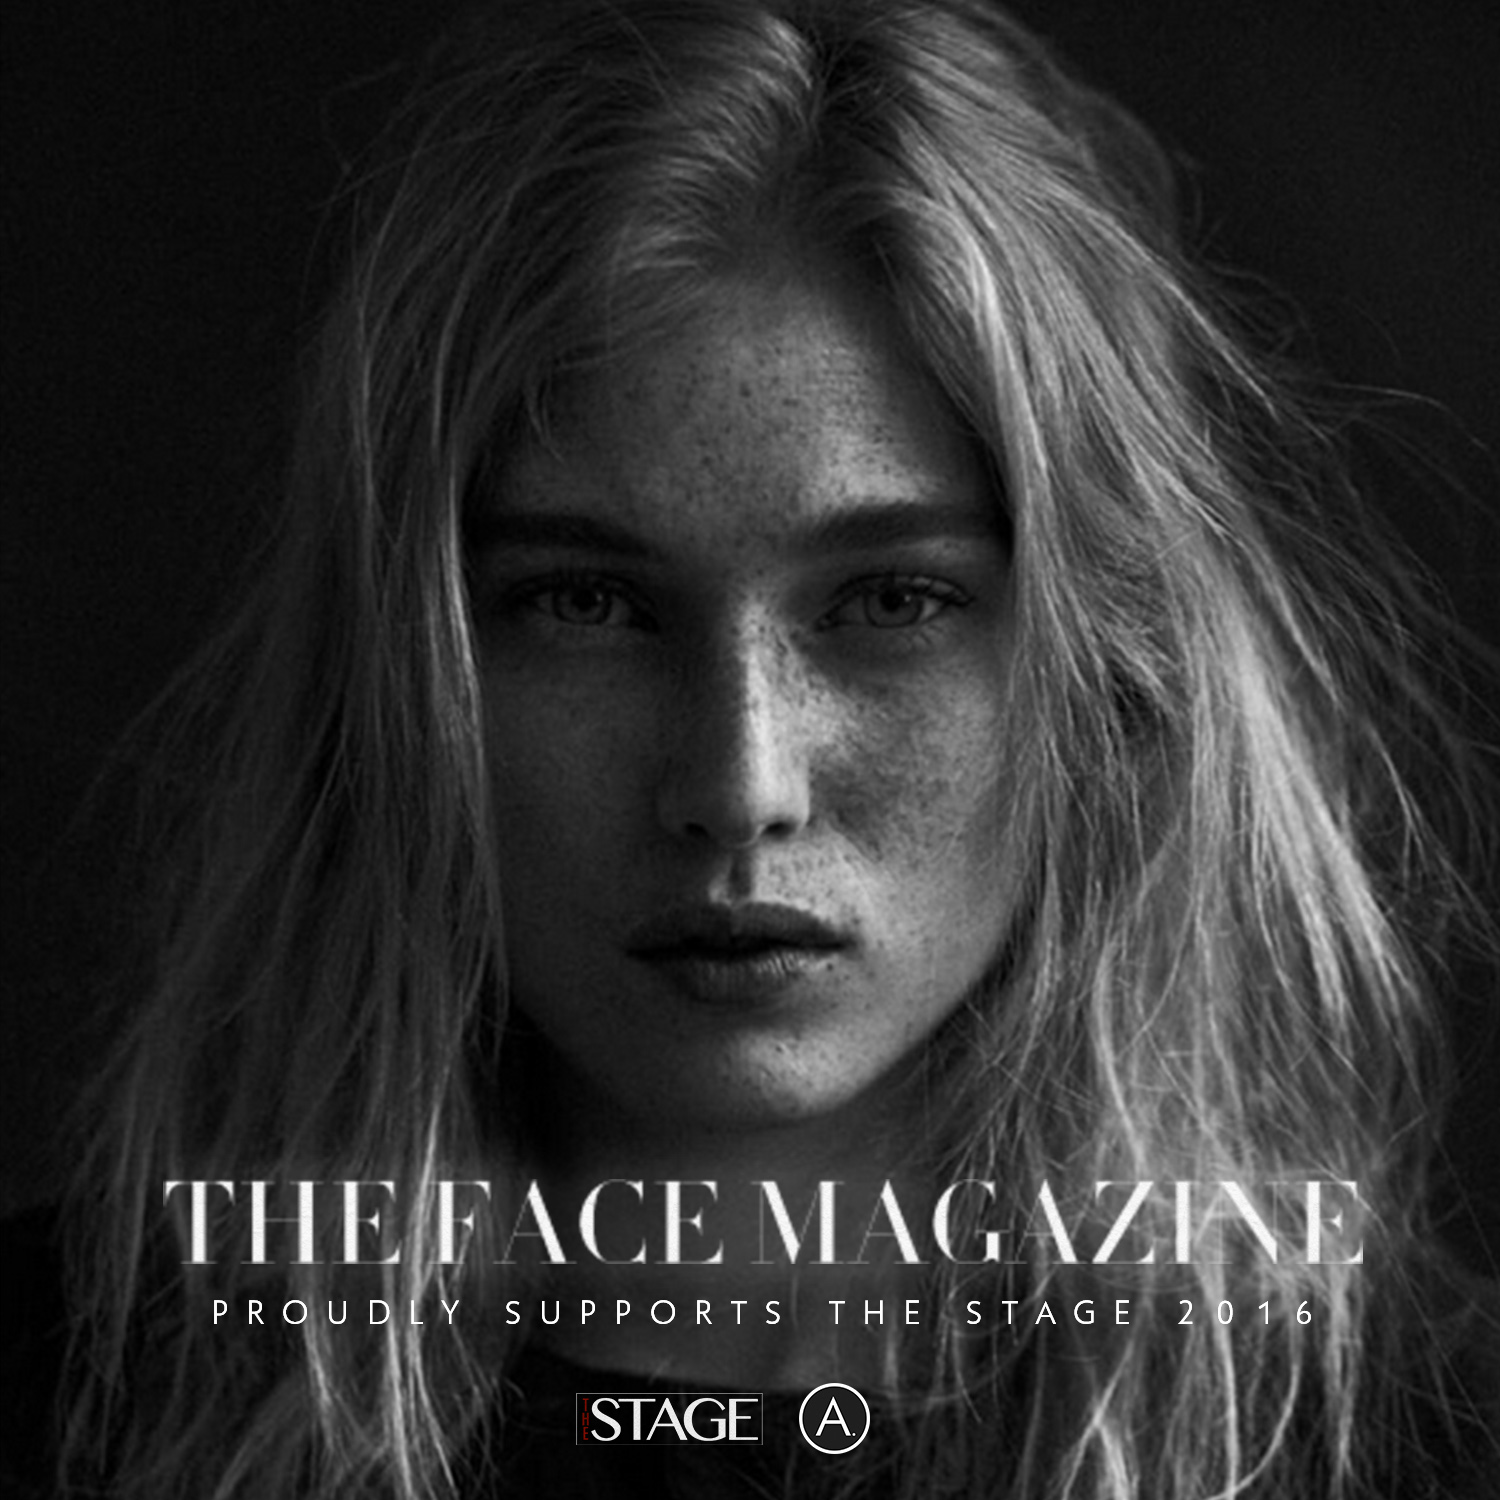 The Face Media Flyer Stage 2016.jpg